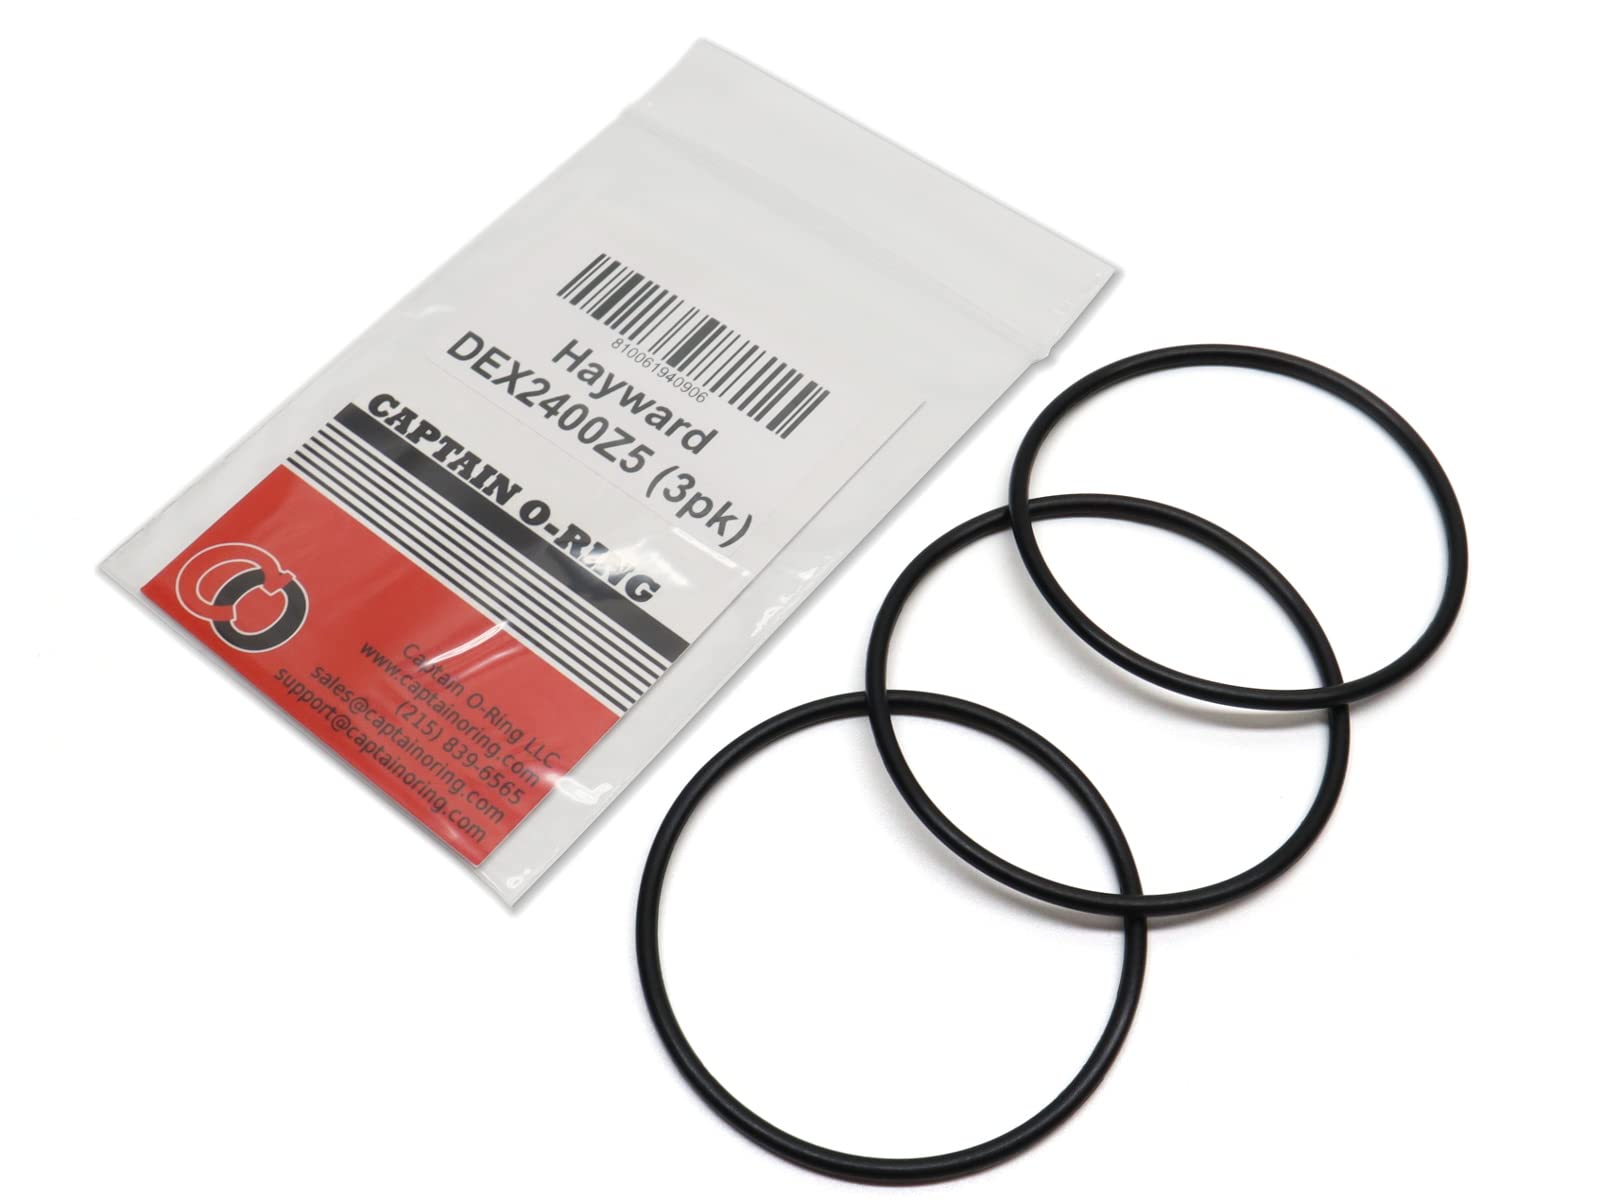 Captain O-Ring – Replacement DEX2400Z5 O-Ring for Hayward Outlet Elbow for Micro-Clear, Pro-Grid DE Filters and Swim-Clear, HCF Cartridge Filters (3 Pack)